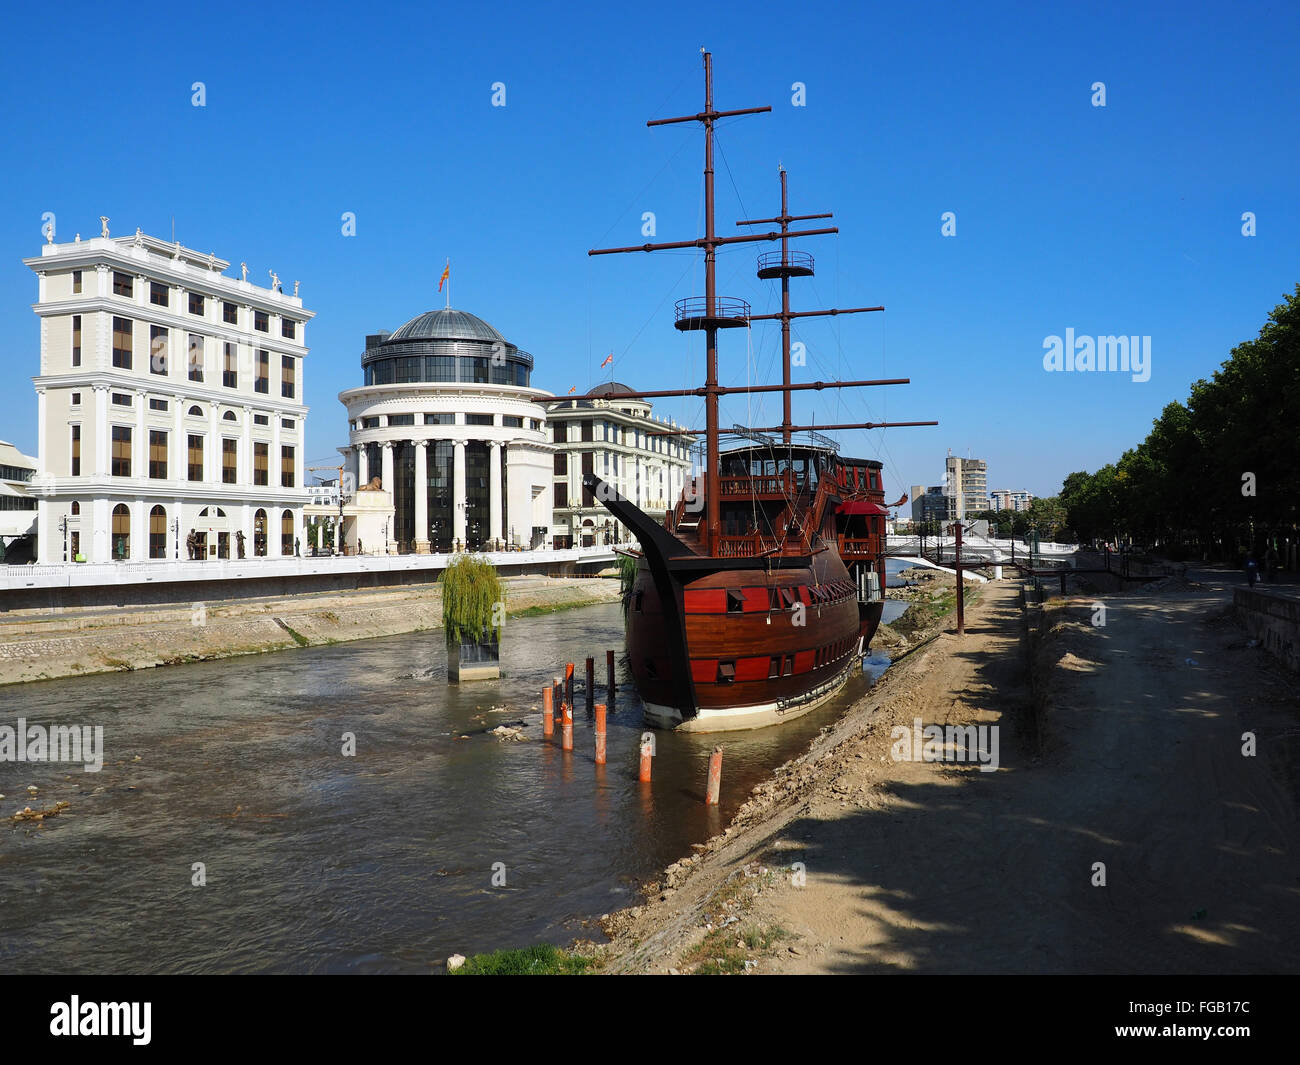 A large wooden sailing ship stranded on the shores of the river Vardar, turned into a restaurant. Stock Photo